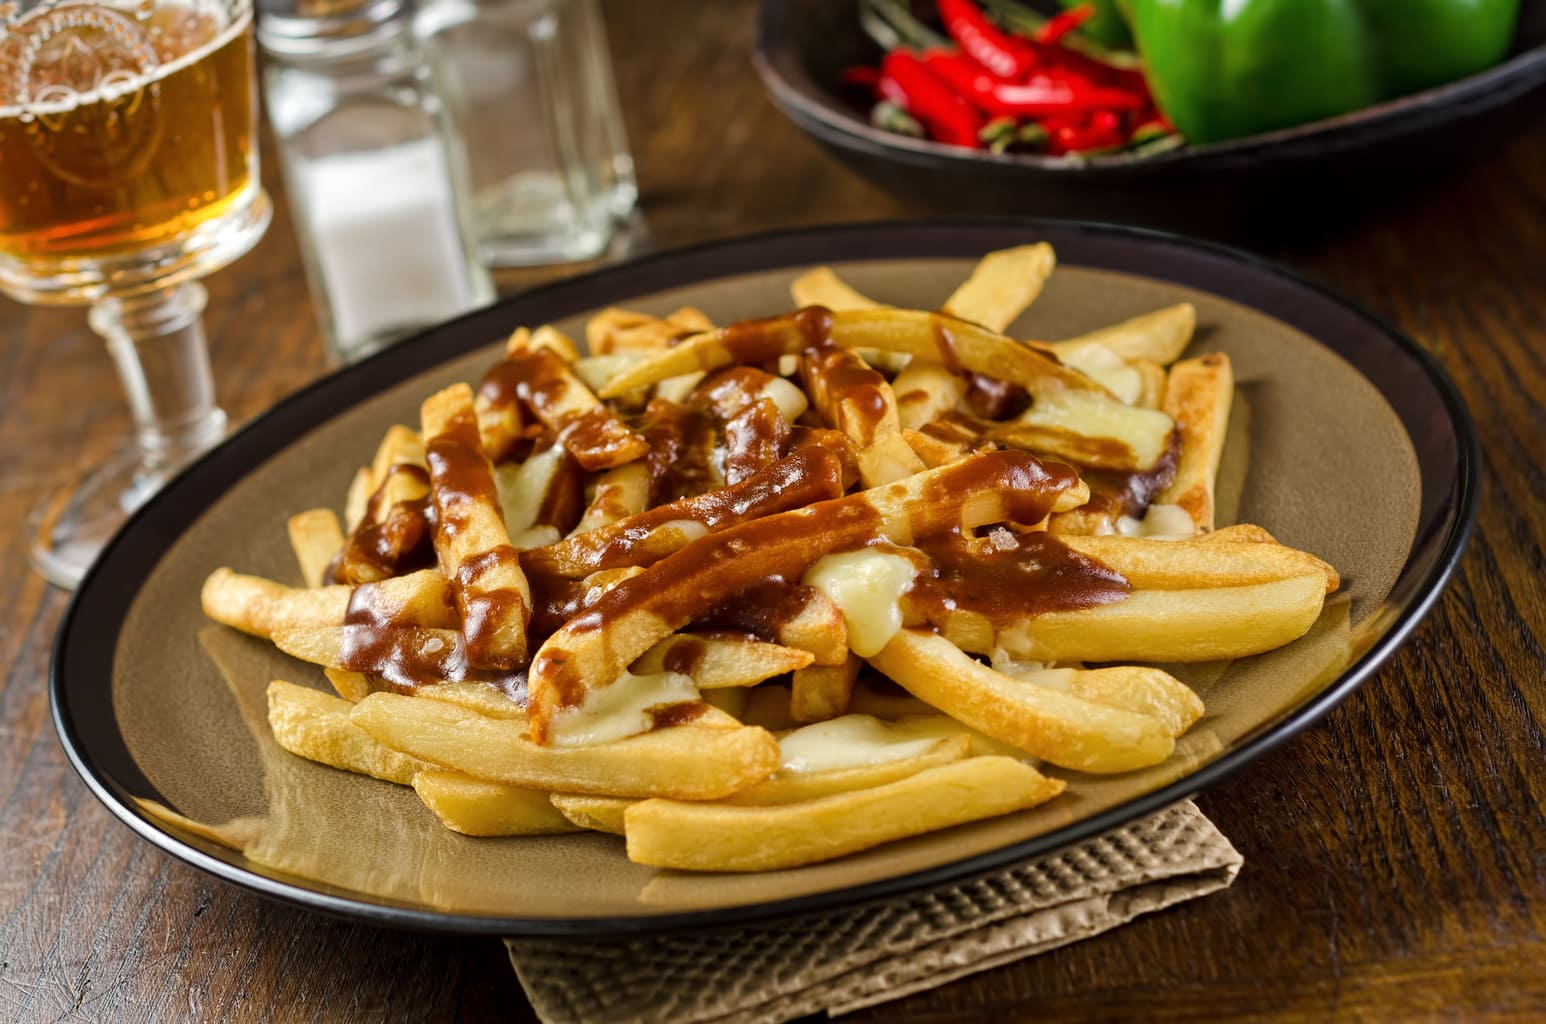 Plan a Trip to Canada and We’ll Reveal Which Dog Breed Suits You the Best Poutine